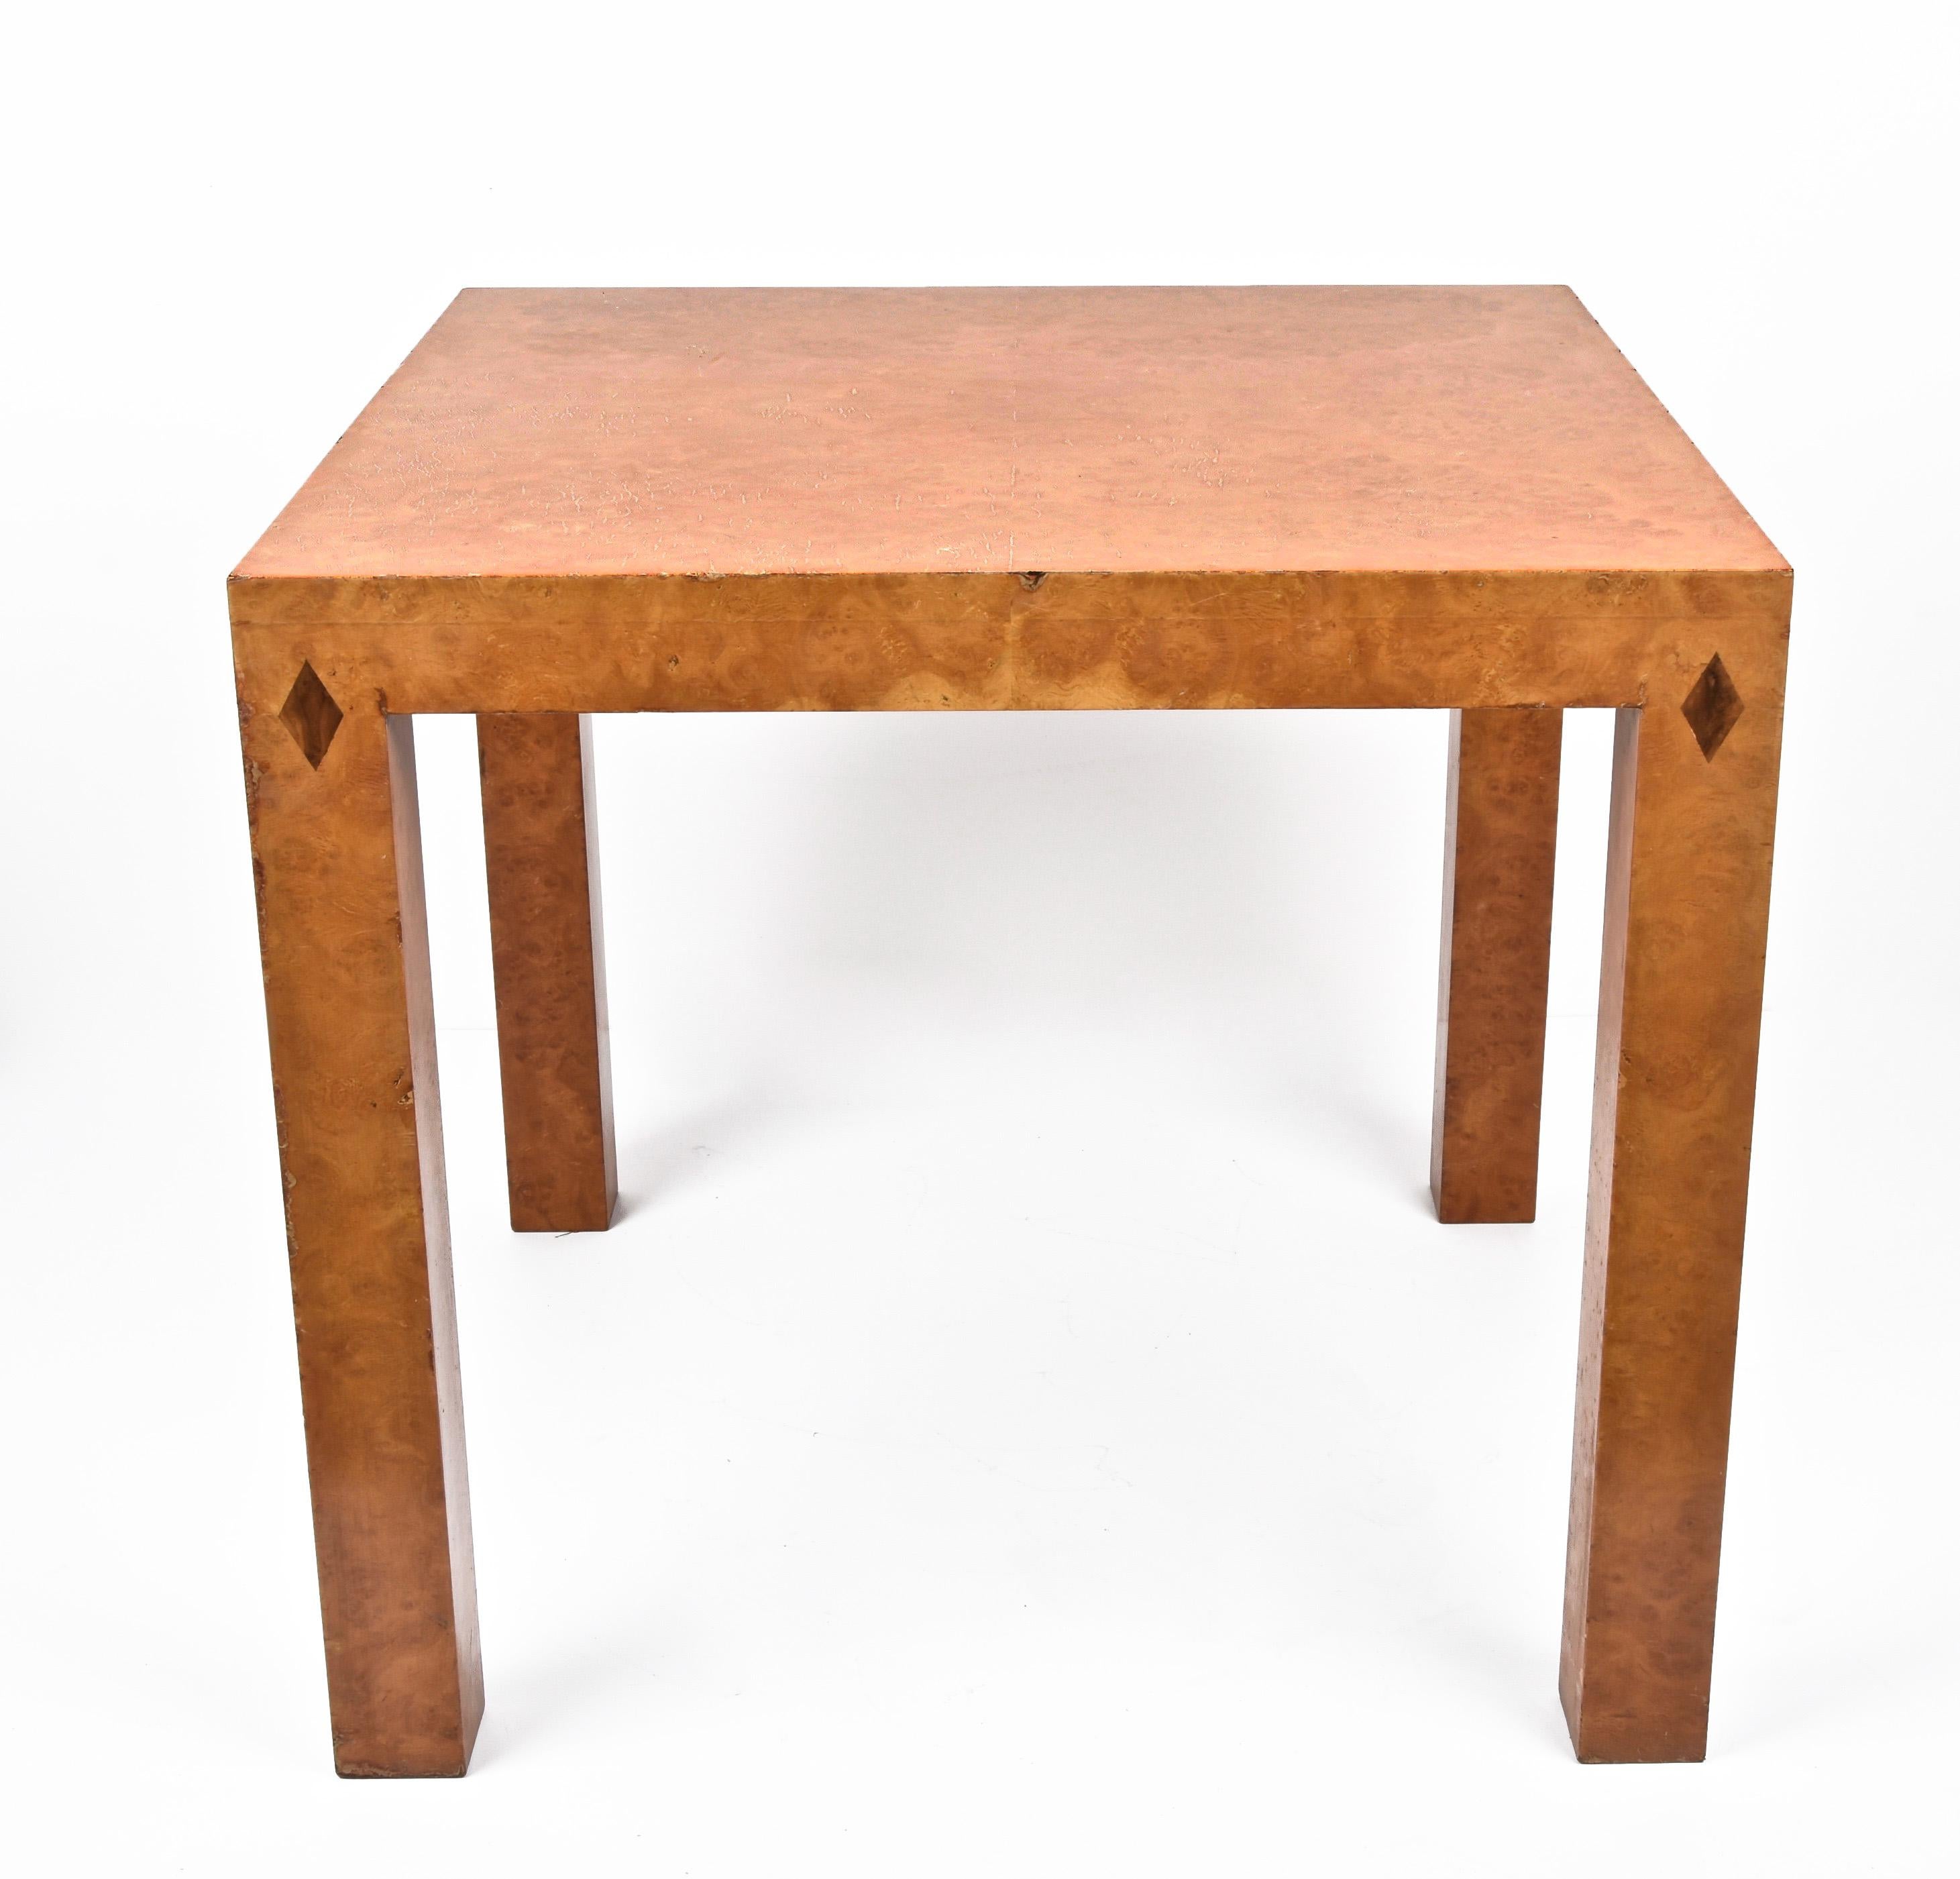 Amazing game table or square side table in poplar briar with inlays. This wonderful piece was designed in Italy during the 1970s in the style of Willy Rizzo.

The lovely colour of the briar, mixed with clean lines and precise inlays make it very